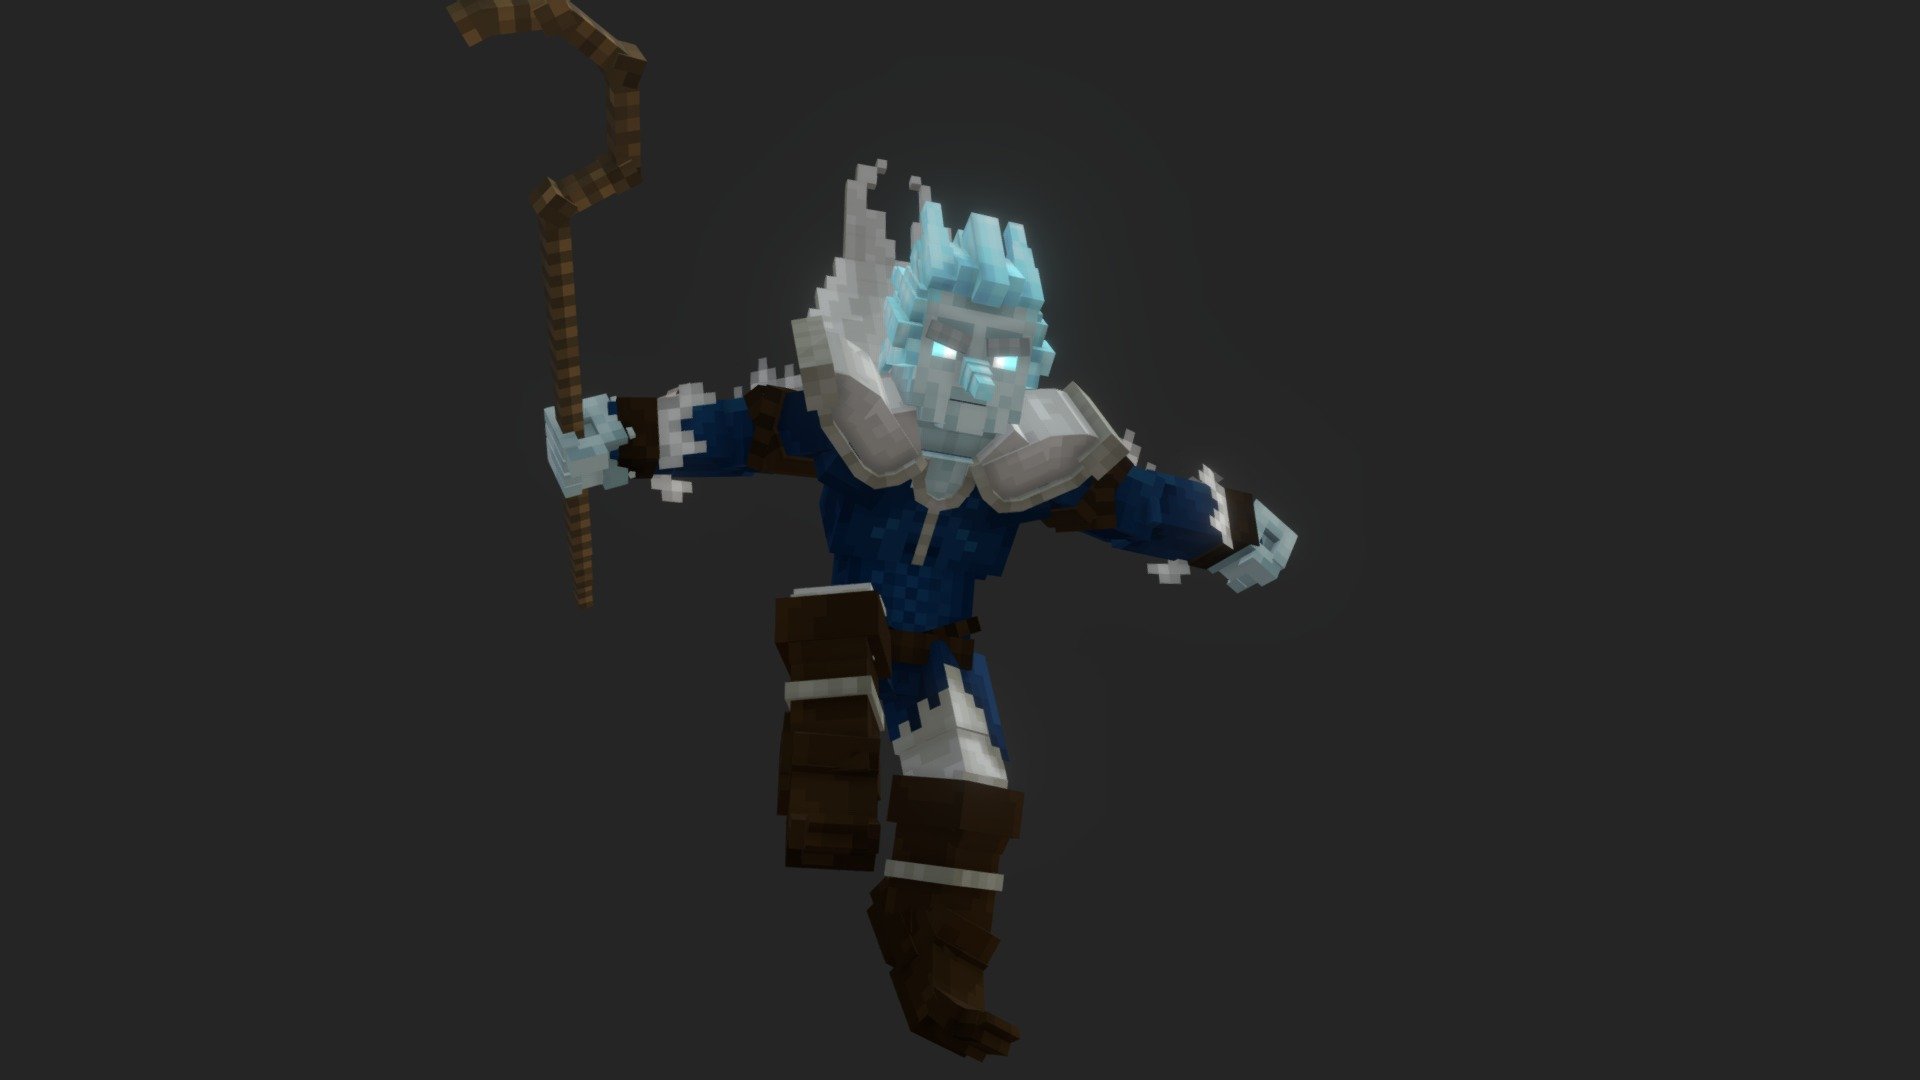 A model inspired by the folklore of Jack Frost, for Amazed!
Private comission via Lumine Studios

Model made for ModelEngine &amp; Mythicmobs plugins, for Java Minecraft.
Check more cool stuff made by me on https://discord.gg/dcXr2bRj8z - Jack Frost - 3D model by Endesman 3d model